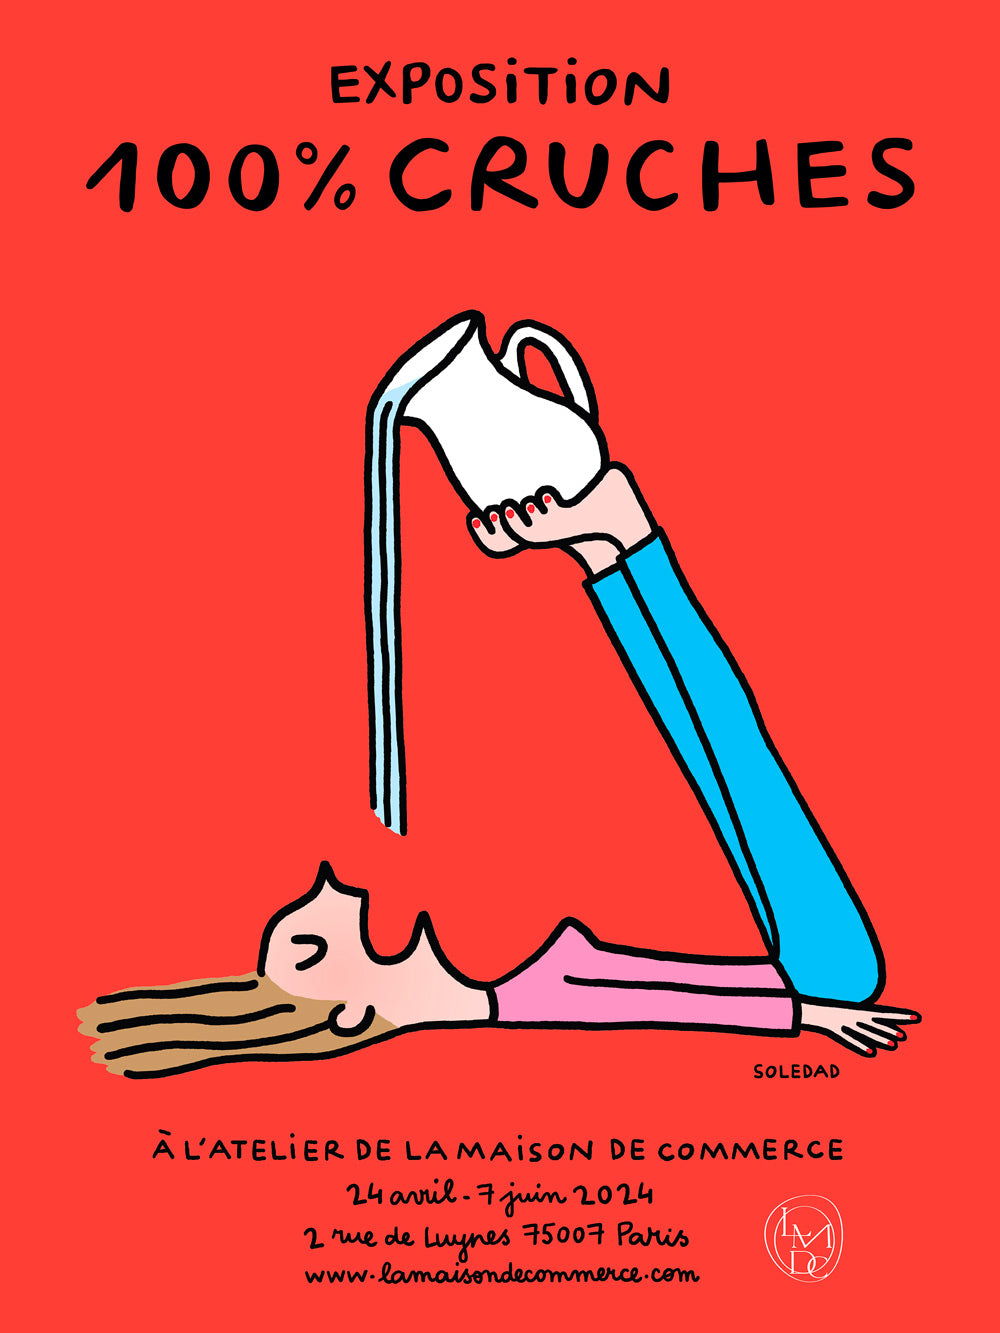 EXPOSITION 100% CRUCHES